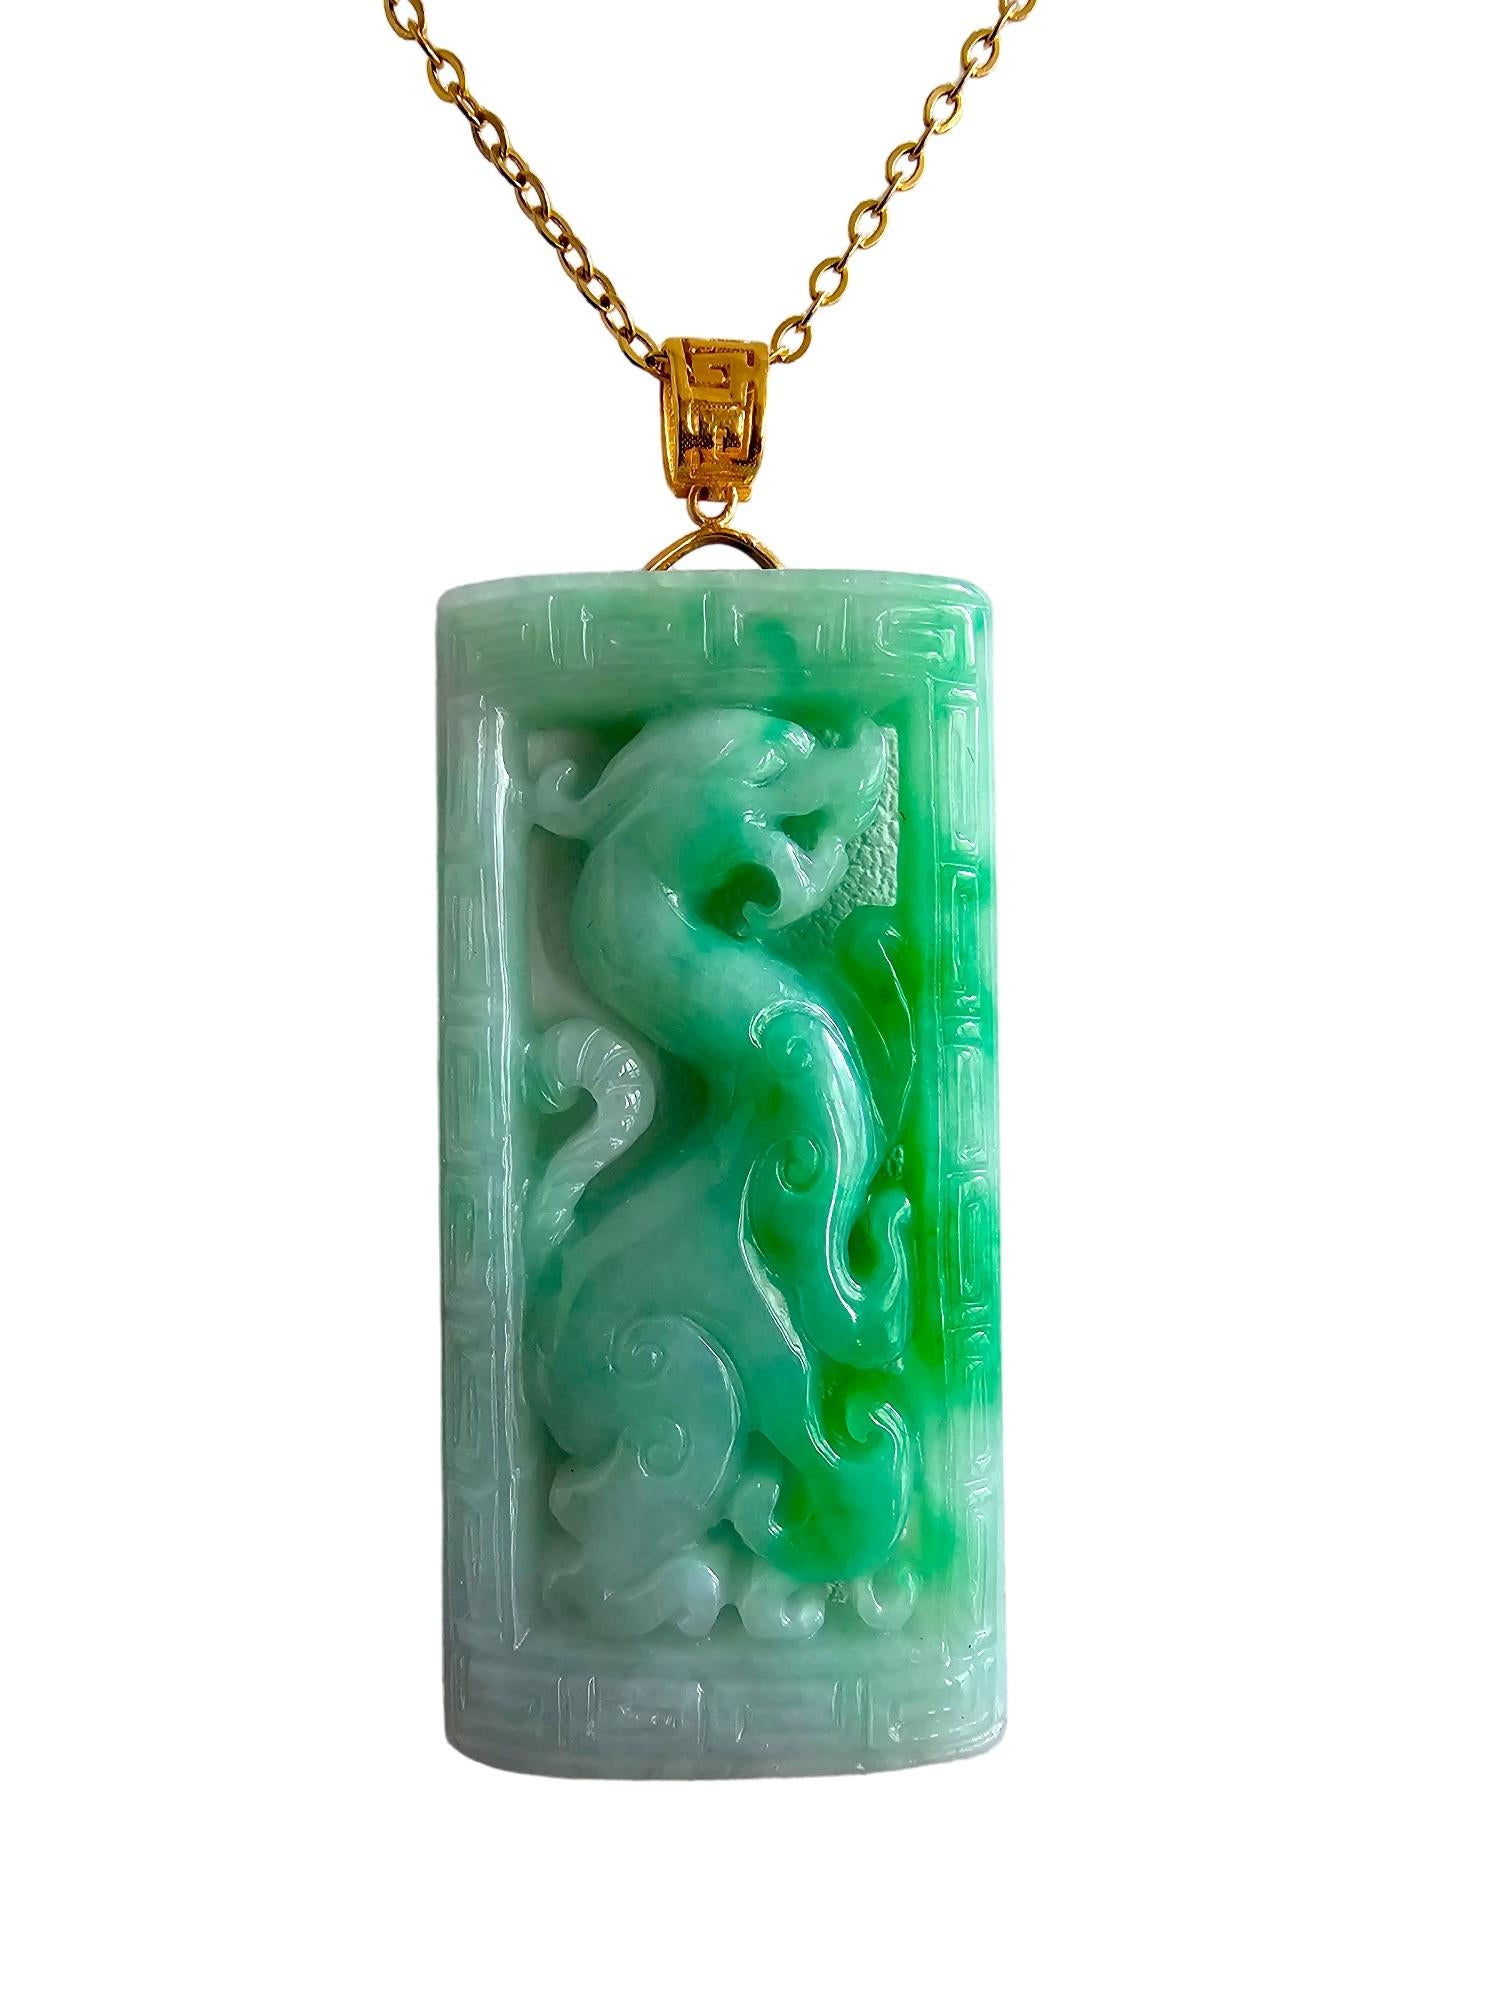 Enchanted Dragon Imperial Burmese A-Jade Jadeite Pendant with 18K Yellow Gold For Sale 5